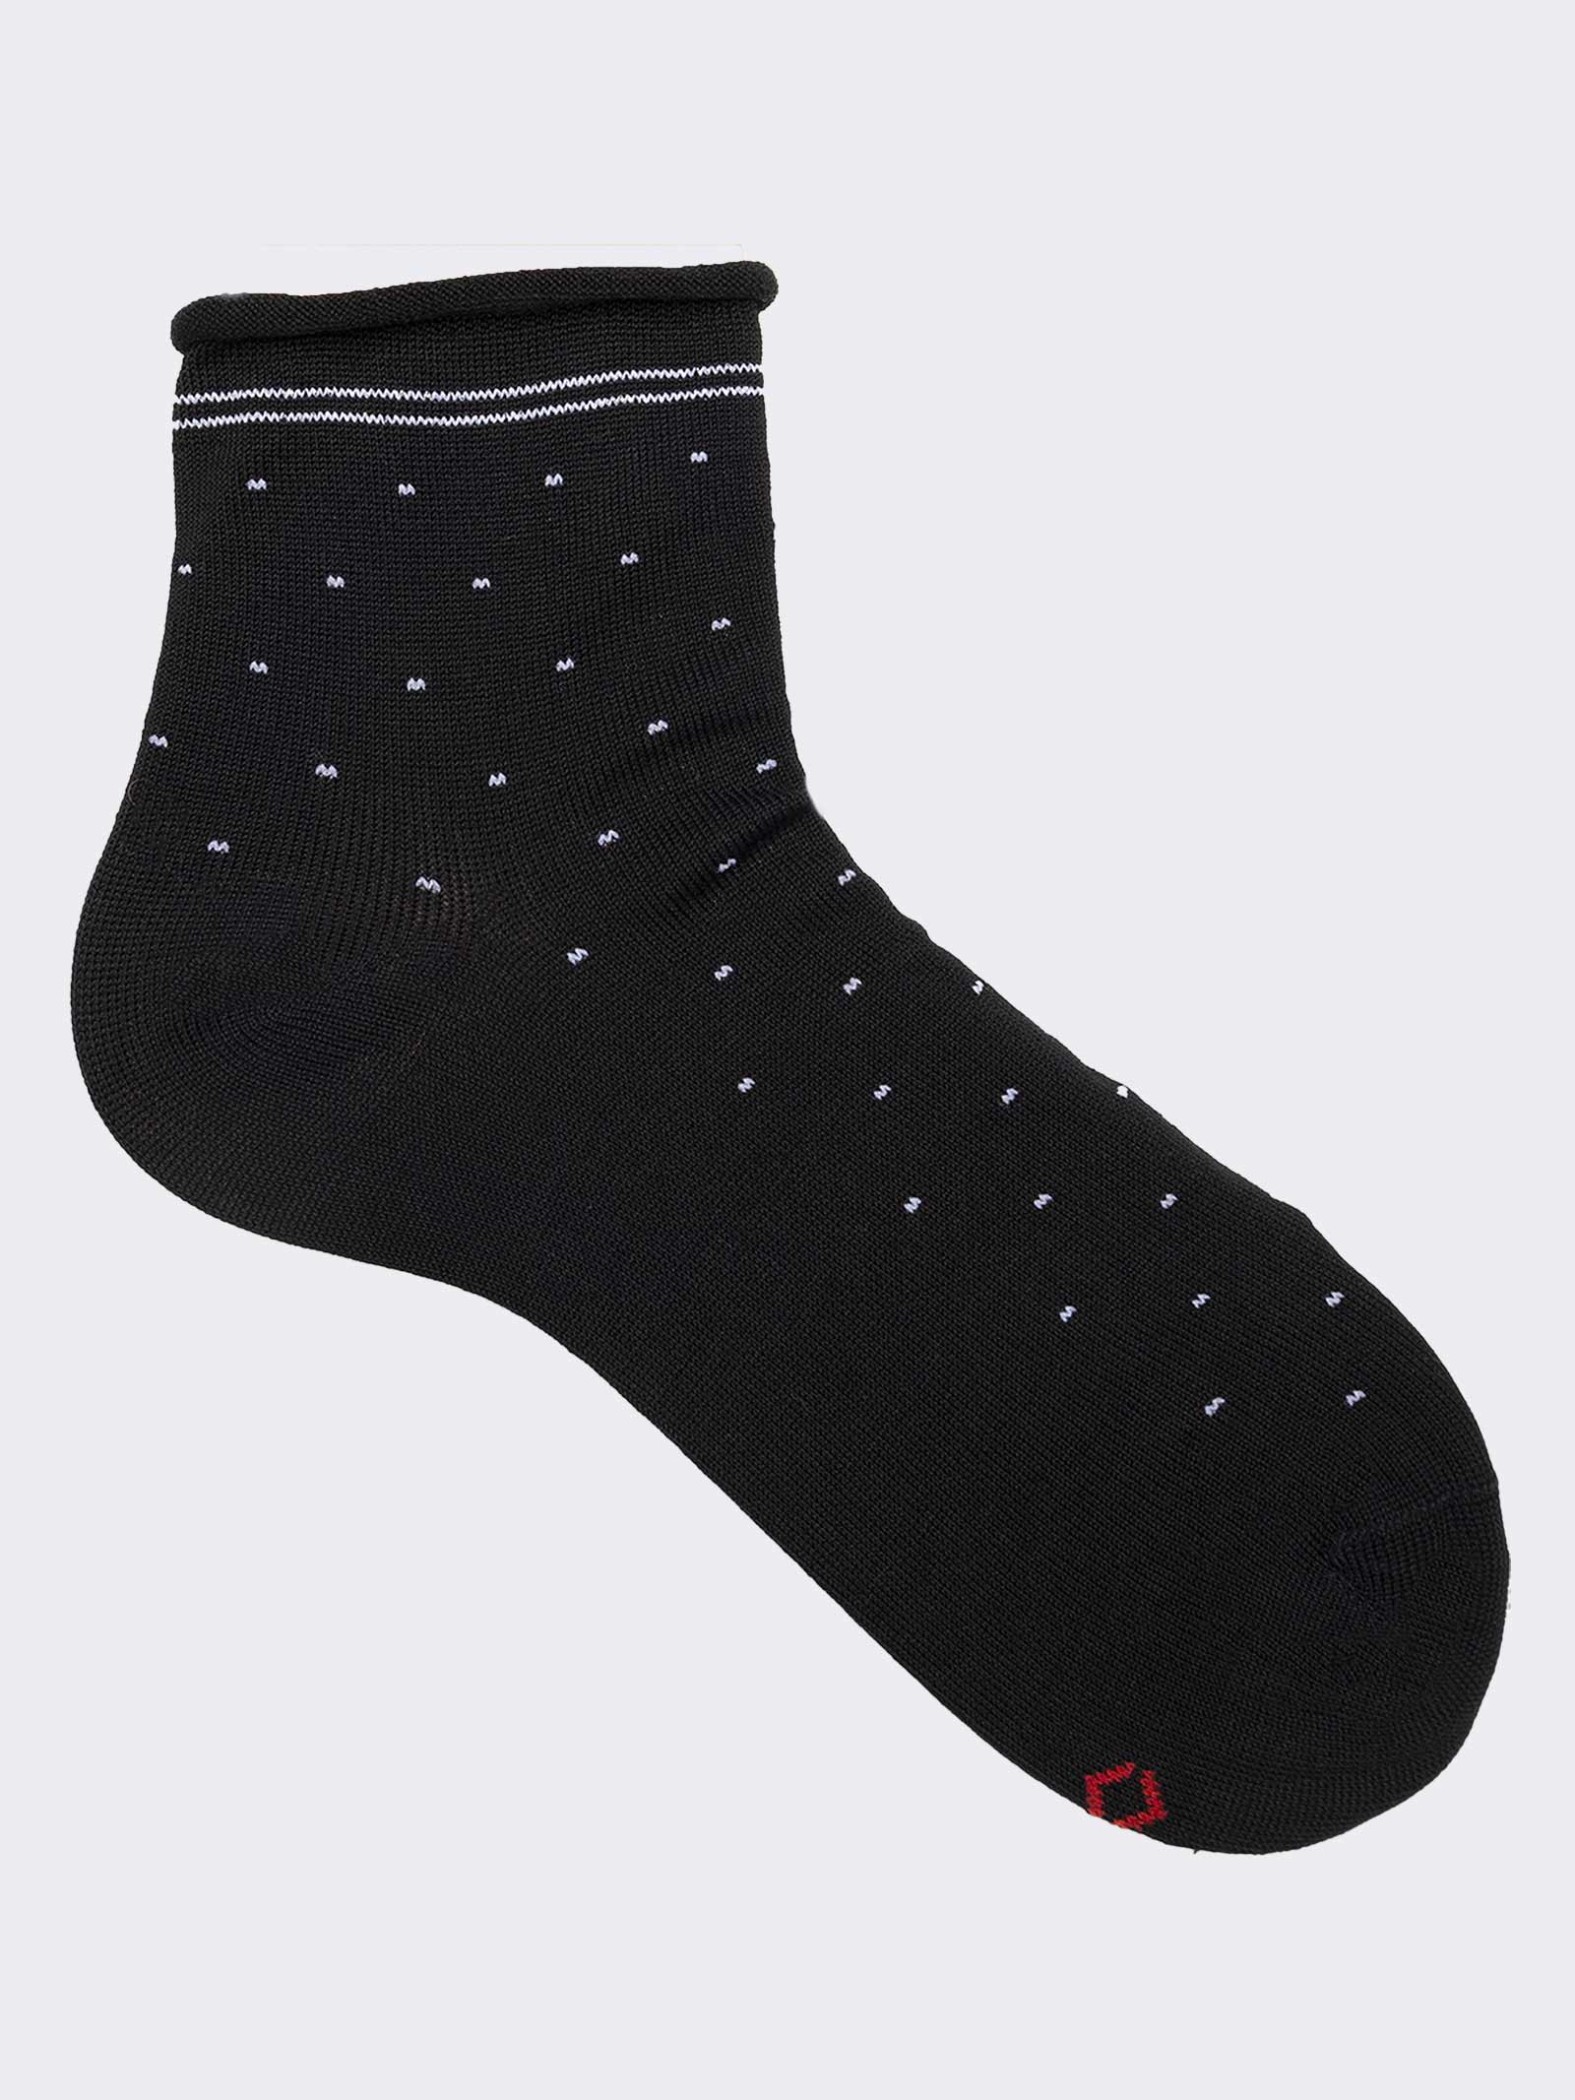 Women's short pincushion patterned socks in fresh cotton - Made in Italy